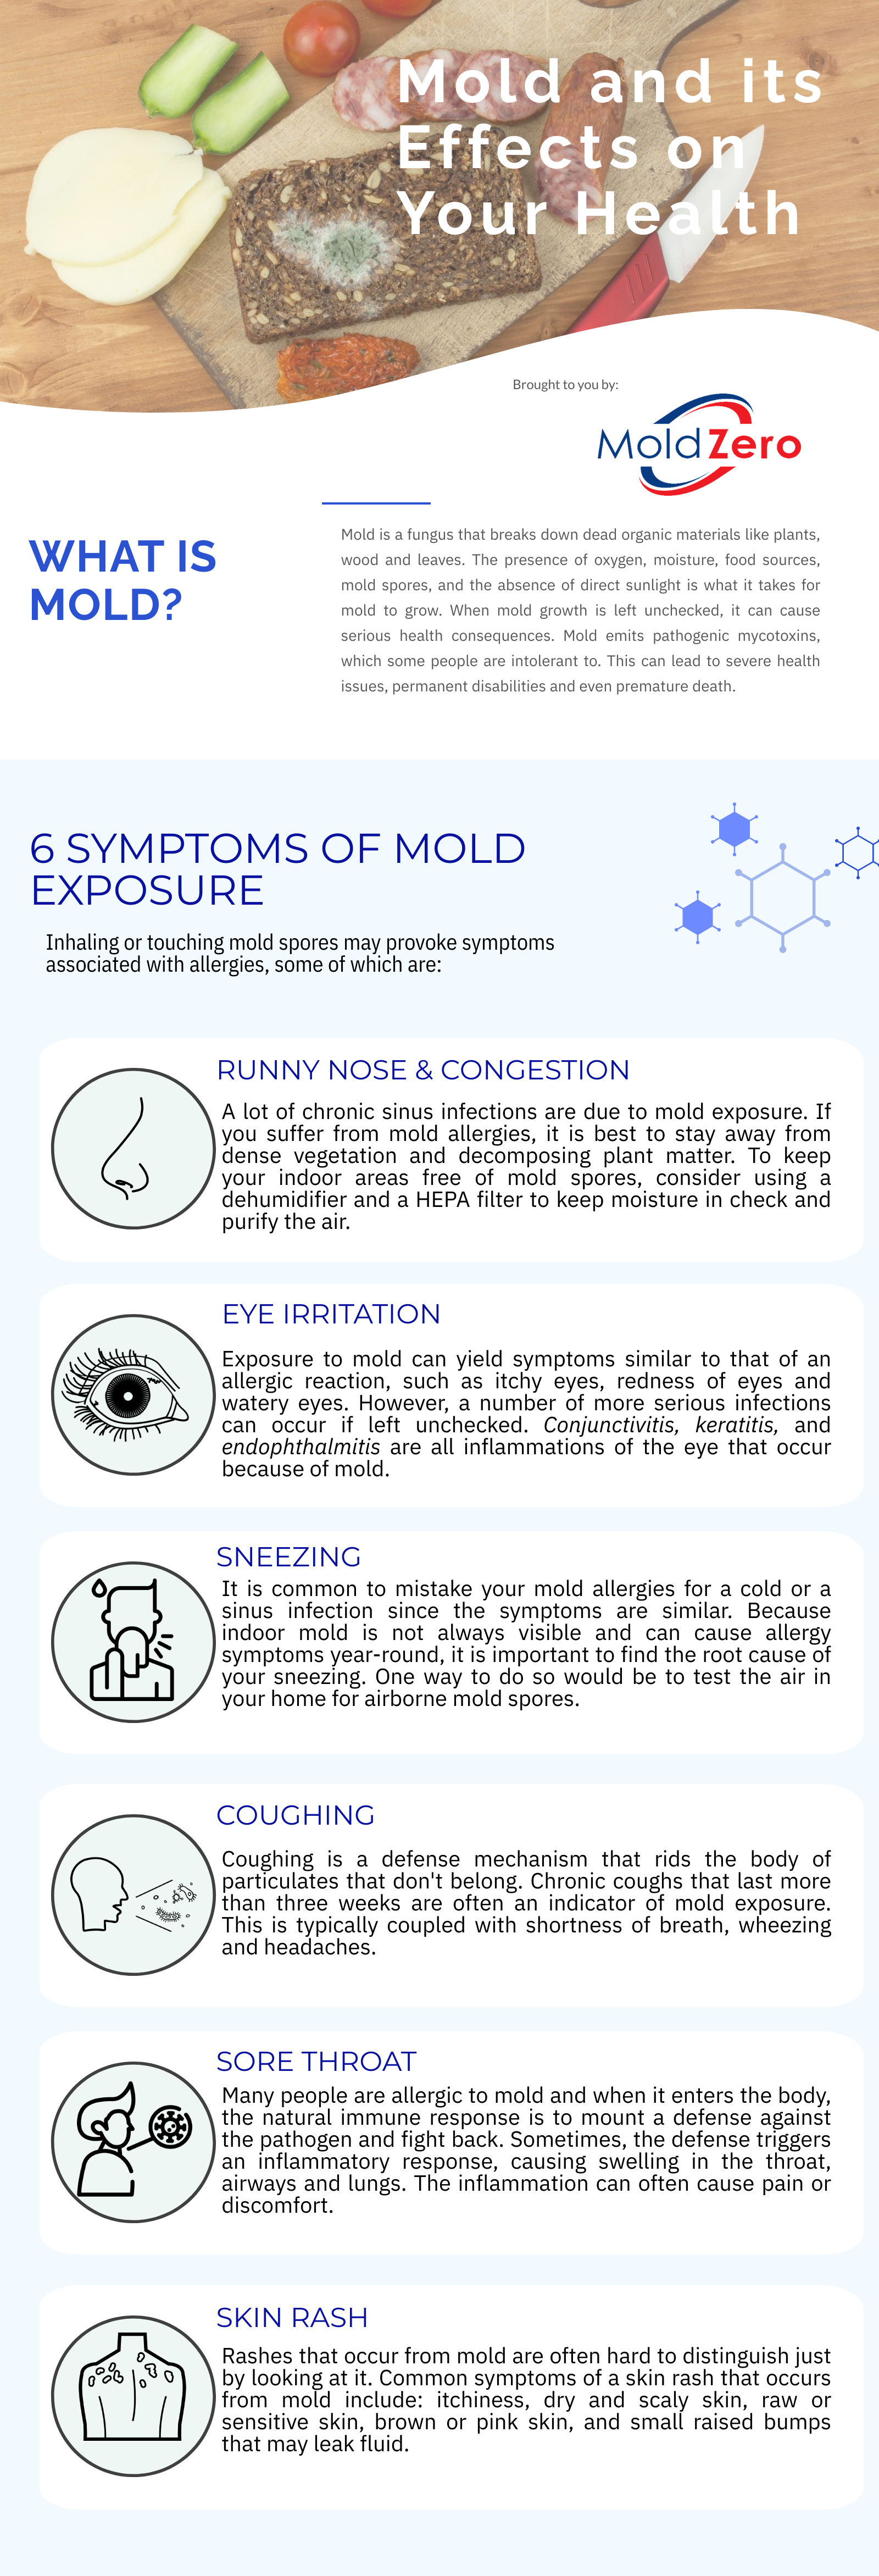 WHAT ARE THE 6 SYMPTOMS OF MOLD EXPOSURE INFOGRAPHIC